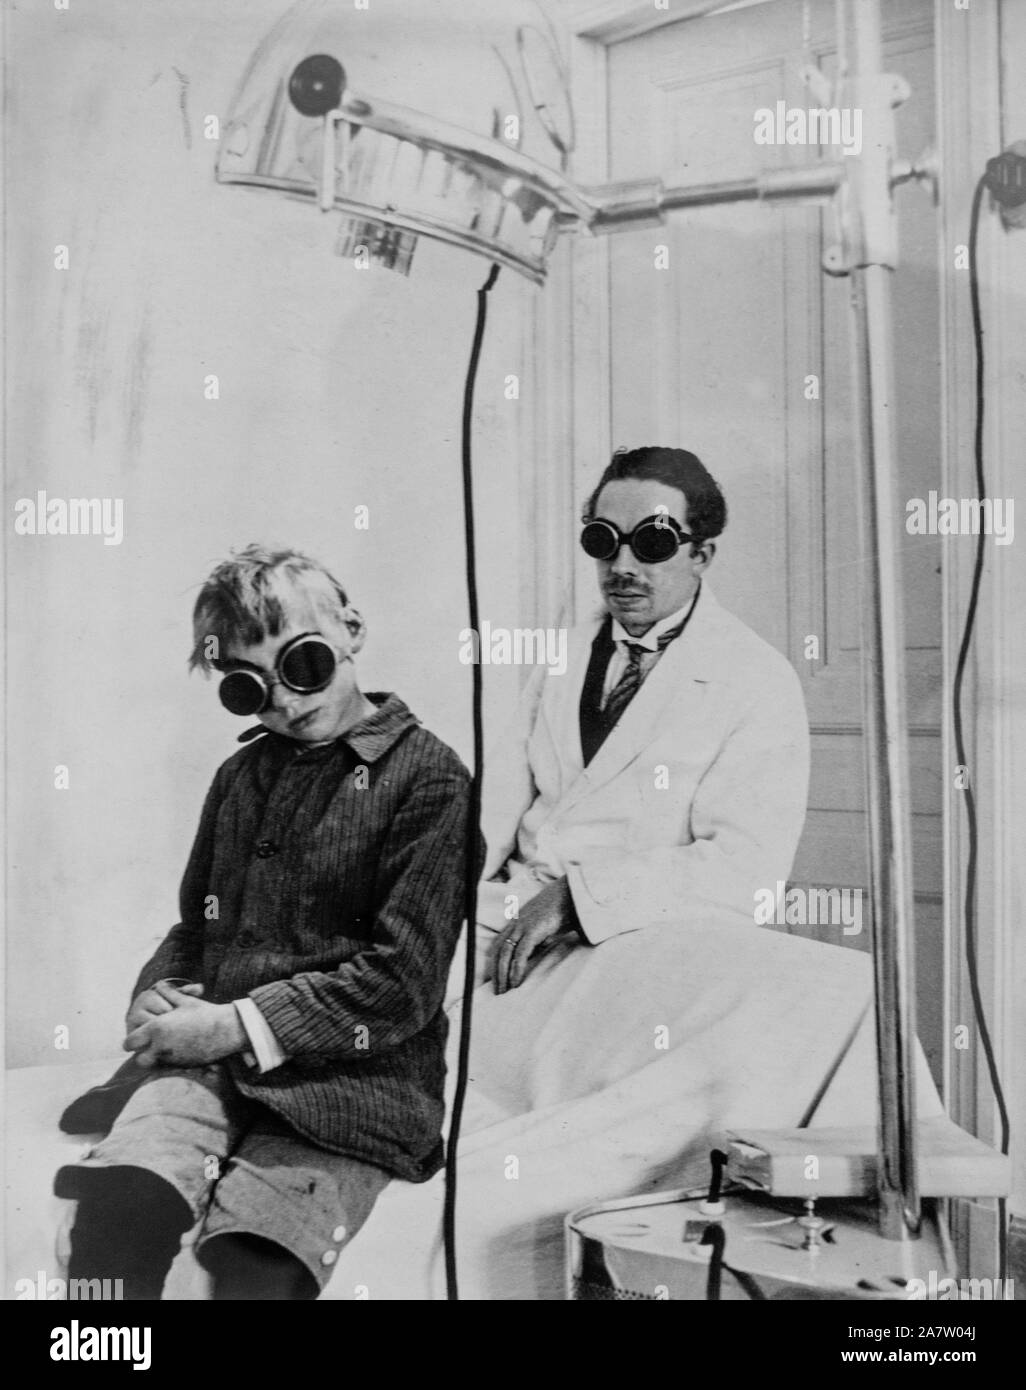 1930 photograph showing doctor and child patient with goggles during light therapy / phototherapy session in clinic Stock Photo